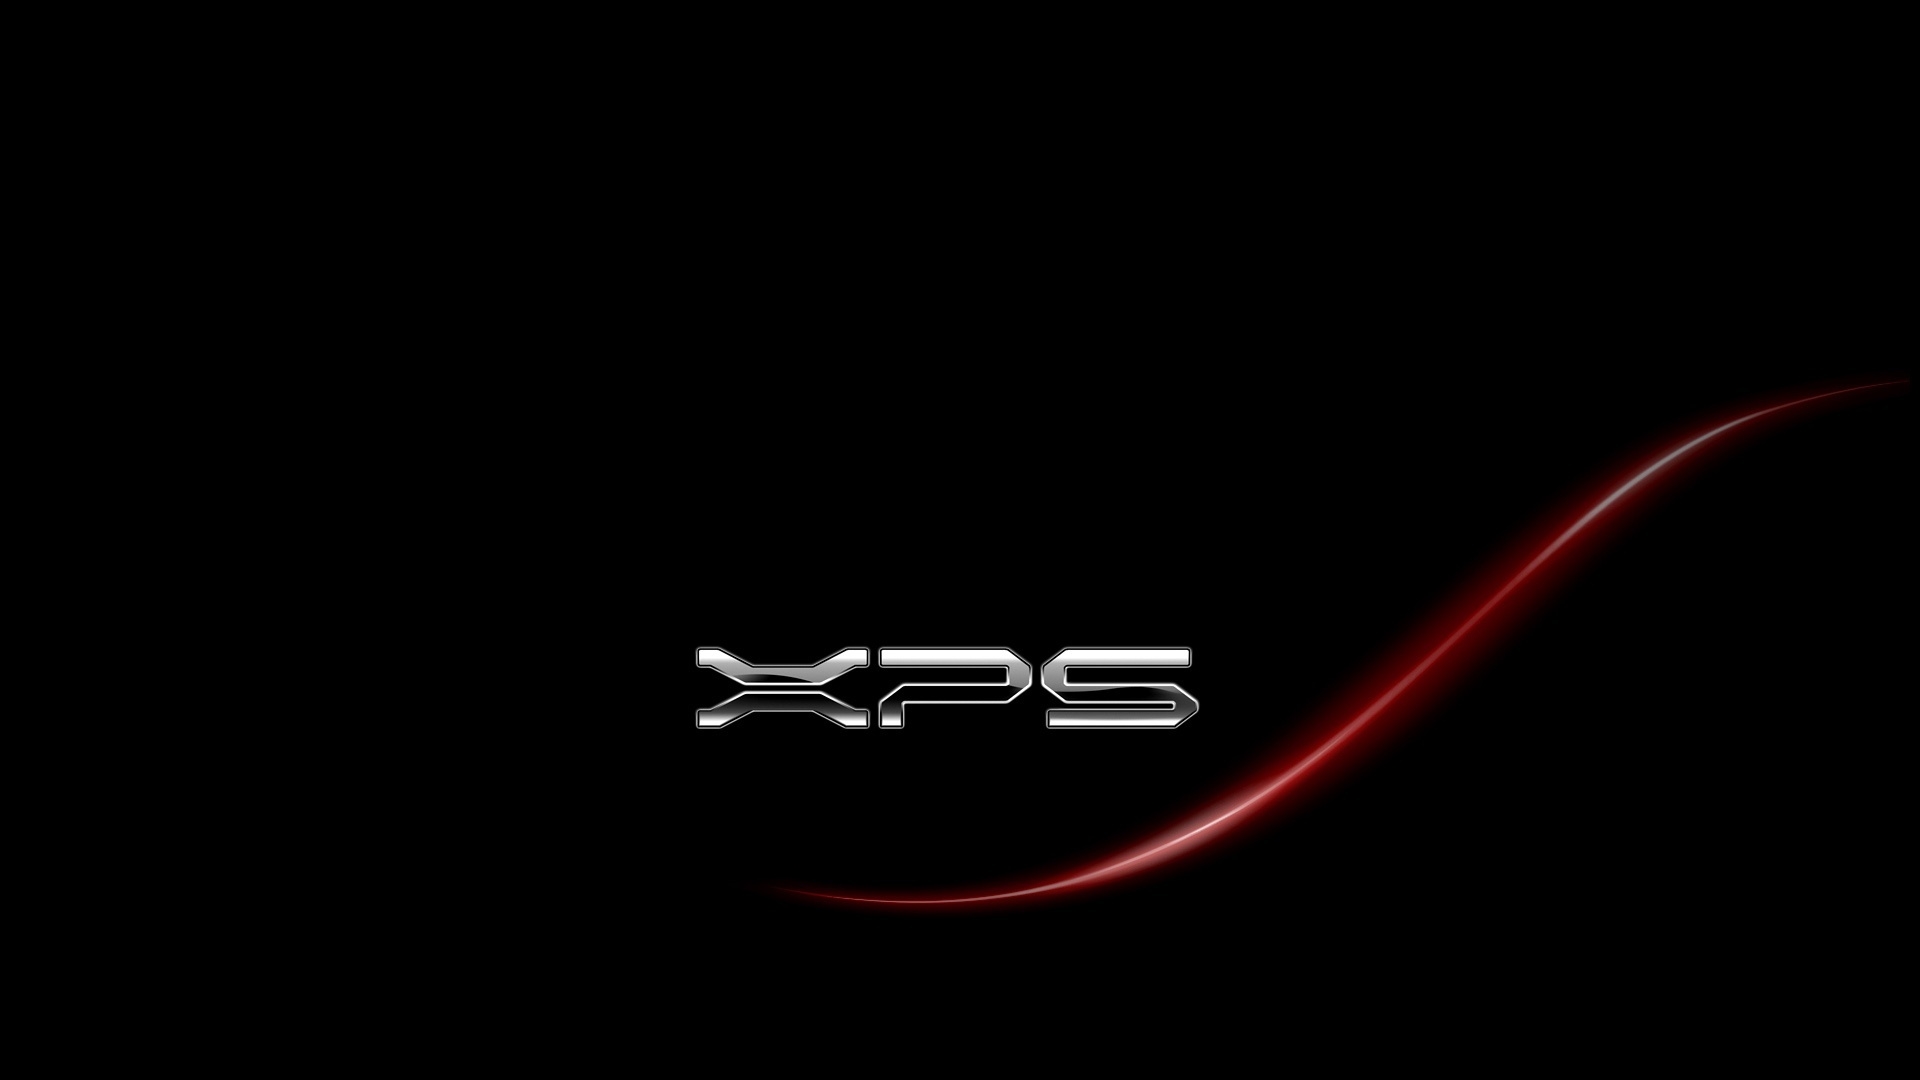 Dell Xps Gaming Red Hd Wallpaper Wallpaperfx